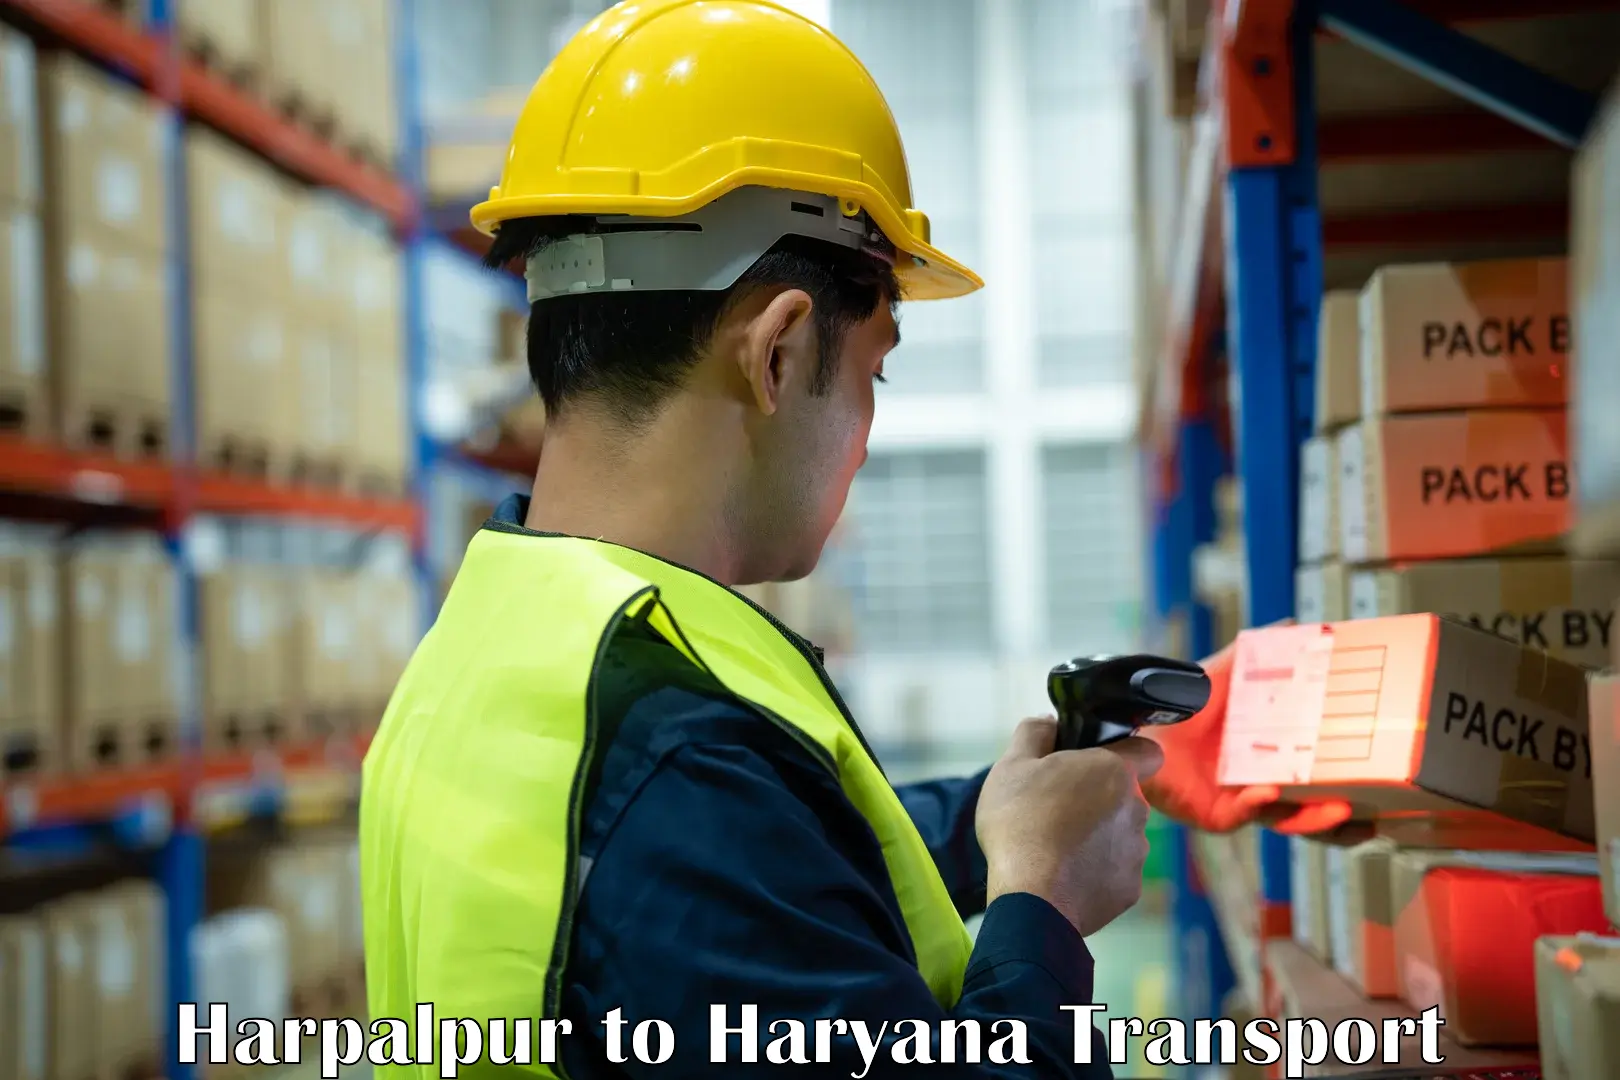 Container transportation services Harpalpur to Odhan